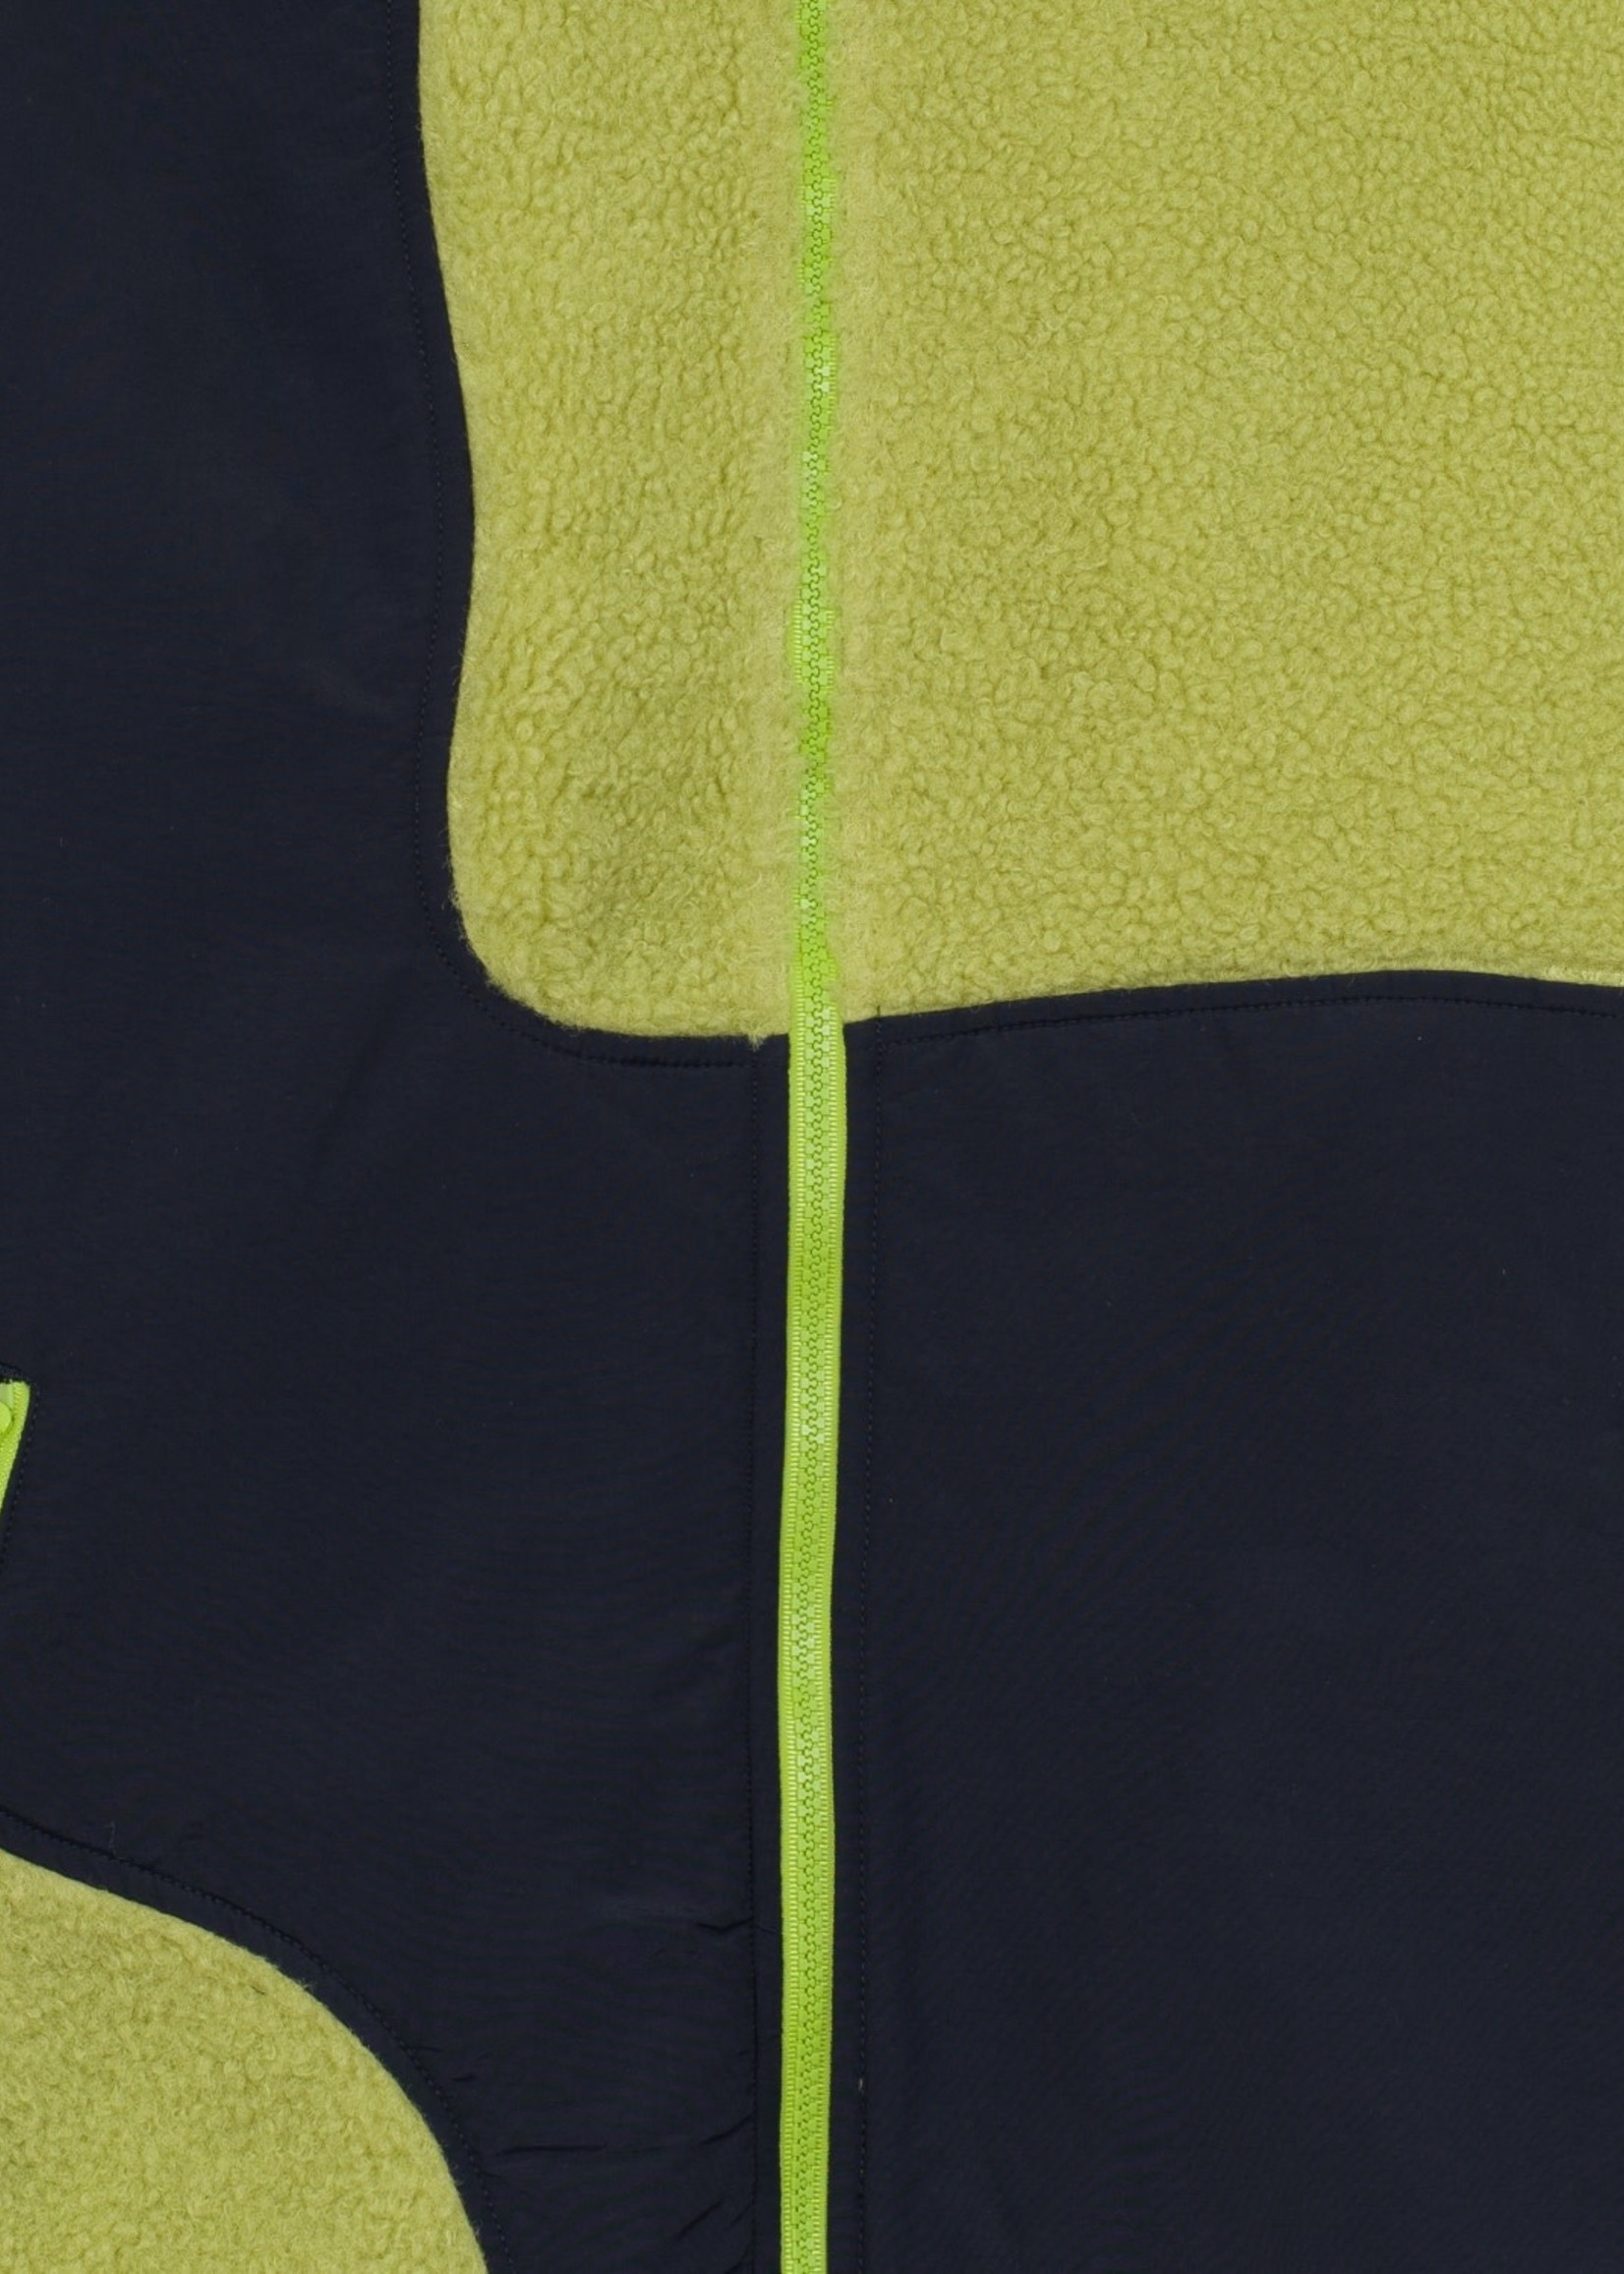 Brain Dead Sherpa and Nylon Paneled Full Zip Jacket in Lime and Black